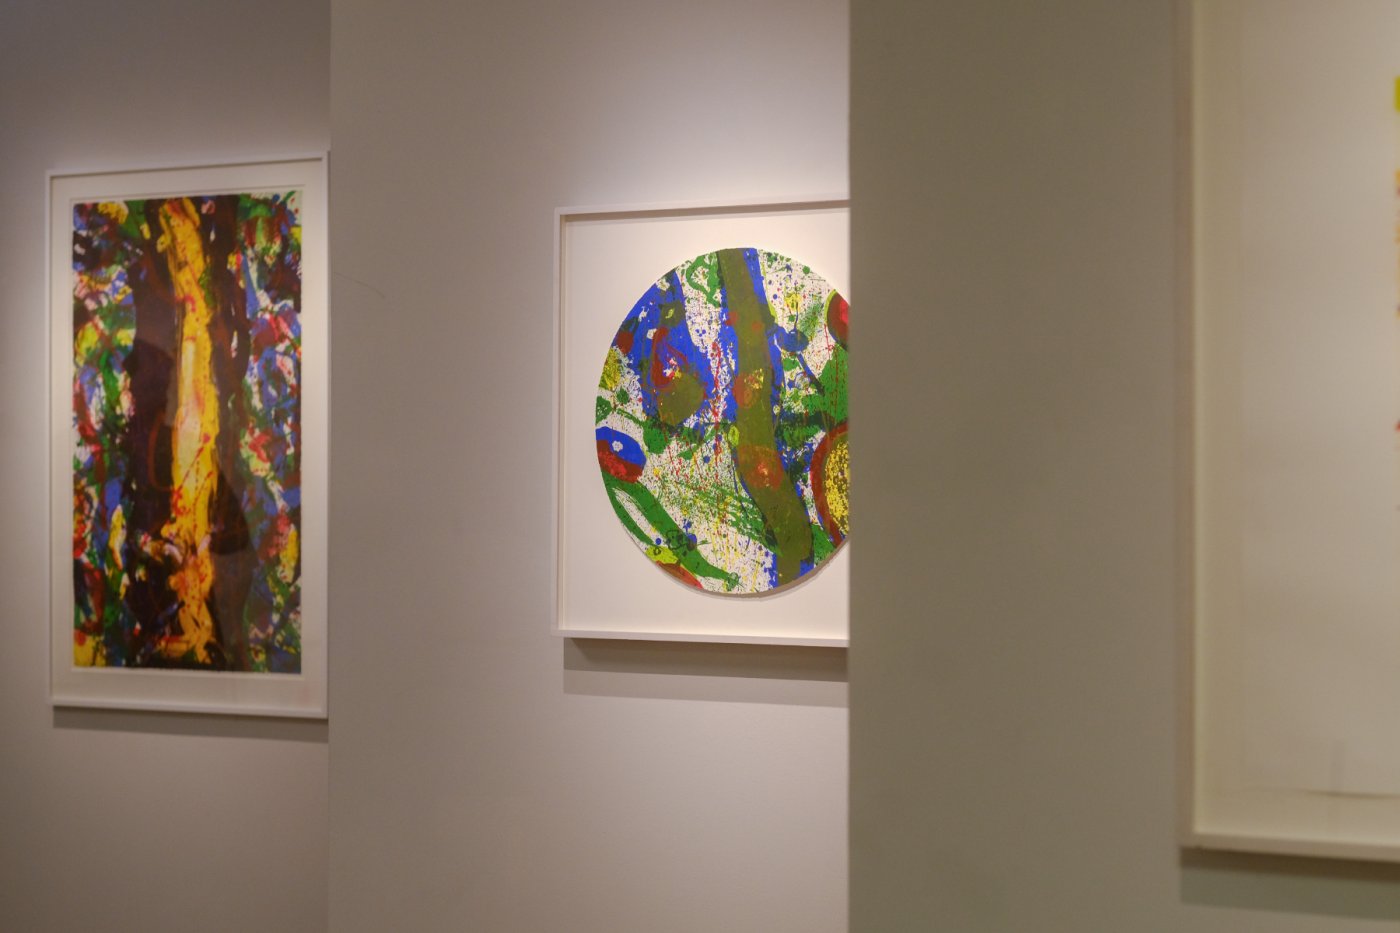 Installation image for The Prints of Sam Francis, at Shapero Modern